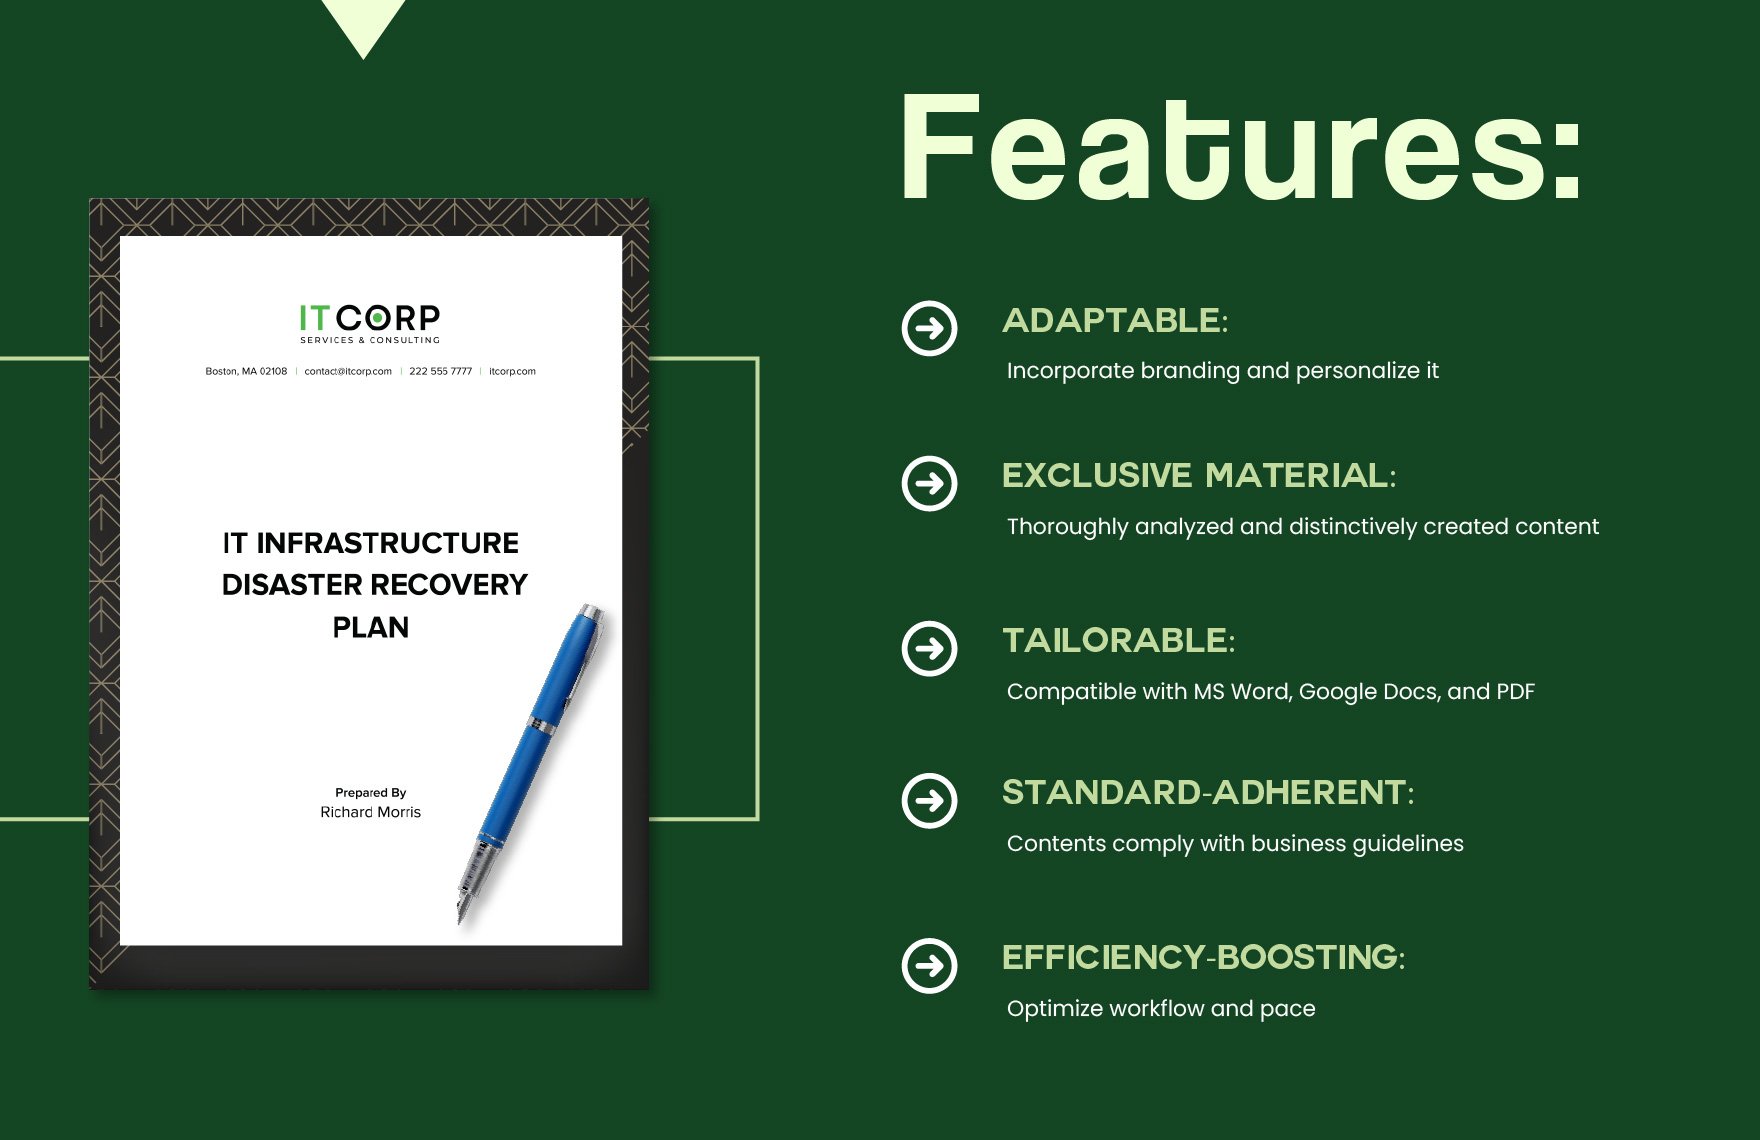 11+ IT Services and Consulting Infrastructure Template Bundle